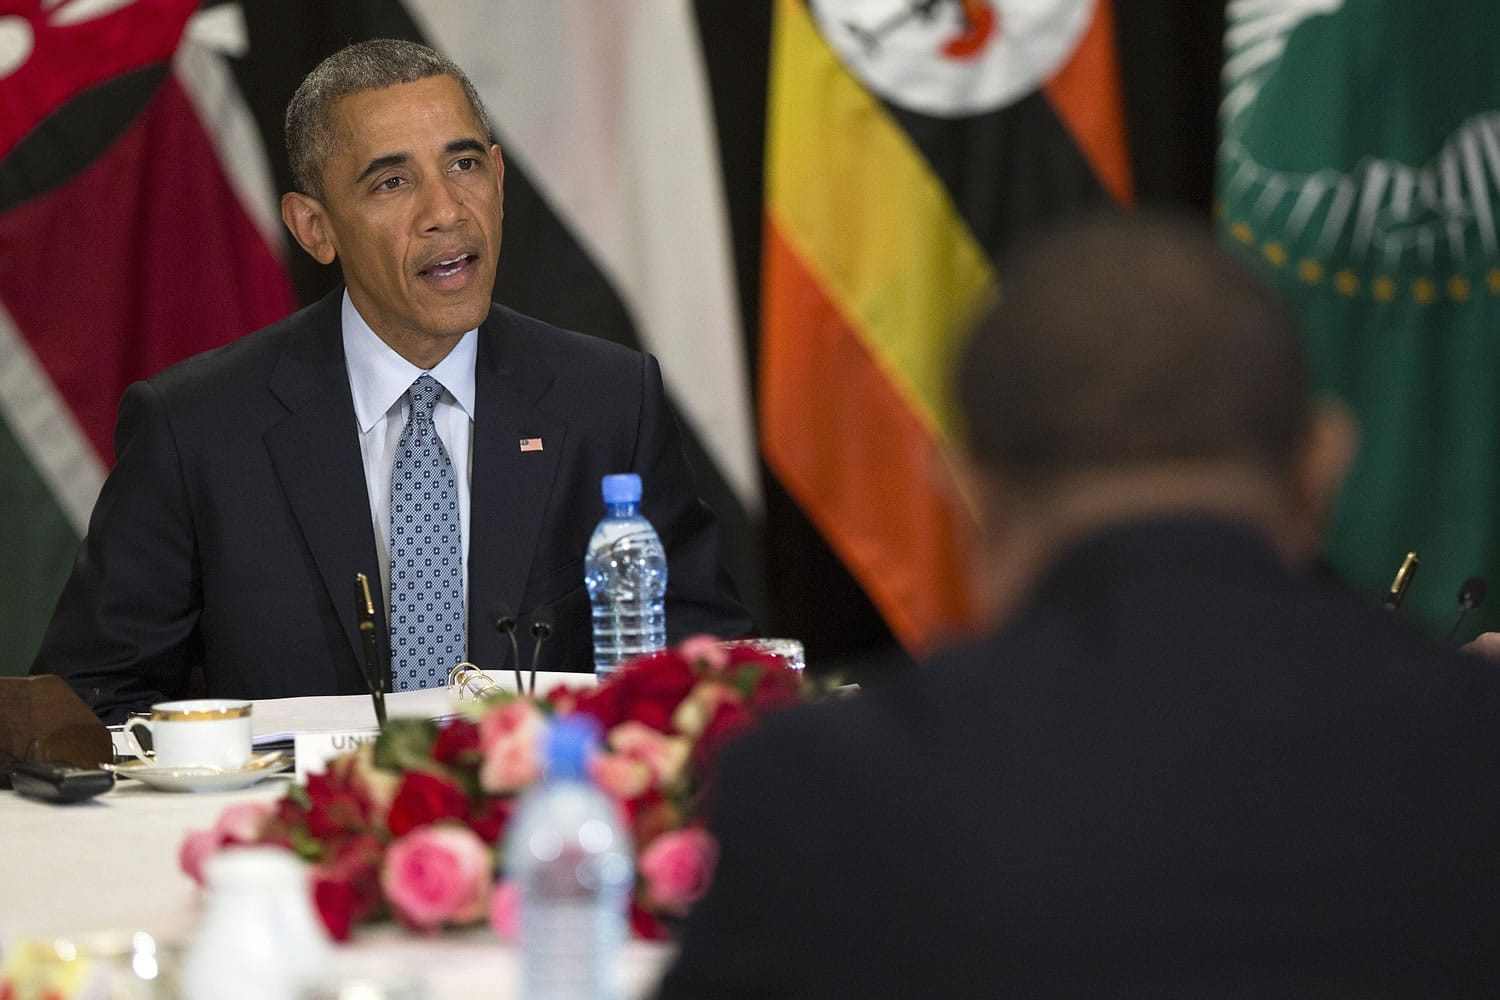 President Barack Obama speaks during a multilateral meeting on South Sudan and counterterrorism issues with Kenya, Sudan, Ethiopia, the African Union and Uganda on Monday in Addis Ababa.